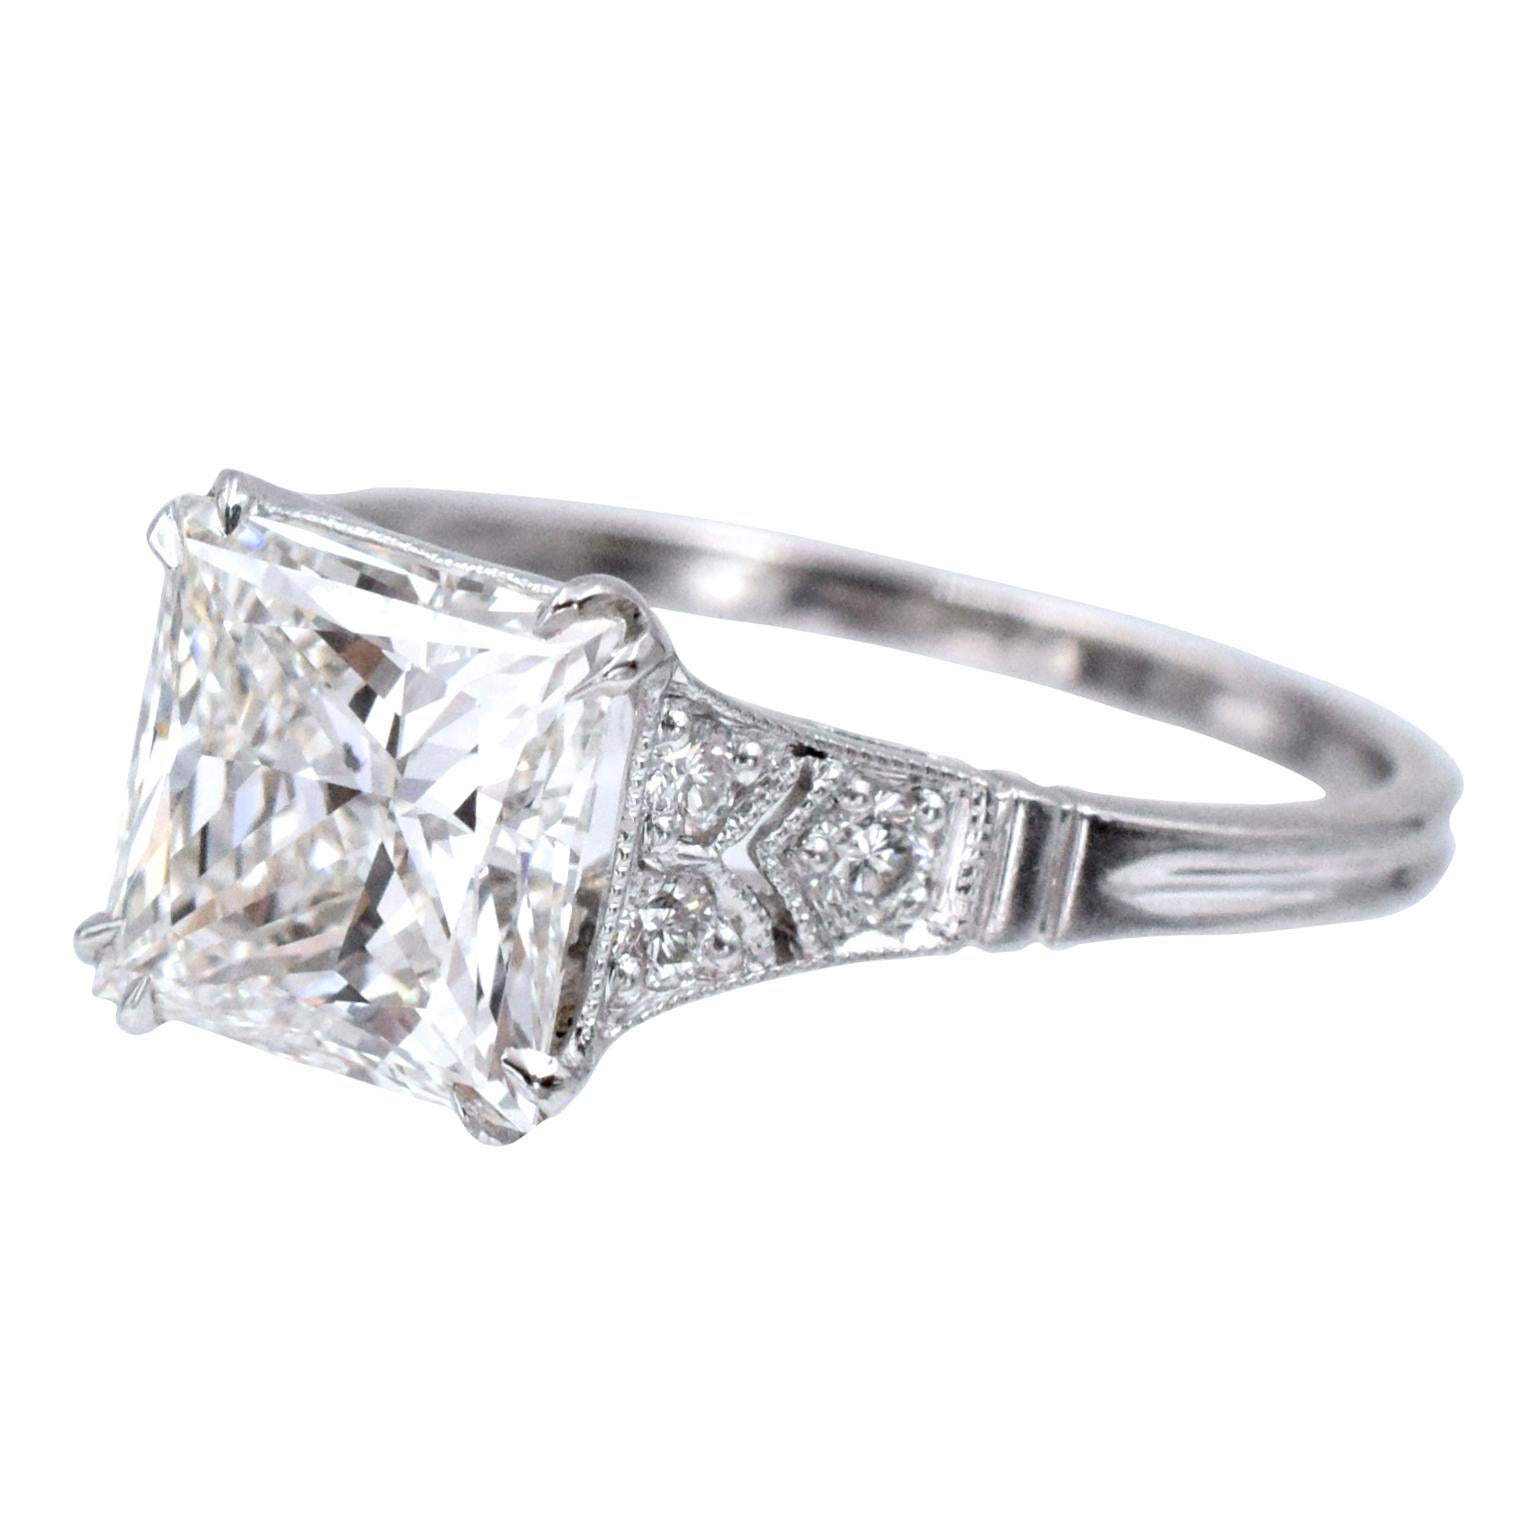 GIA 2.33 Carat Princess Cut Diamond Engagement Ring In Excellent Condition For Sale In New York, NY